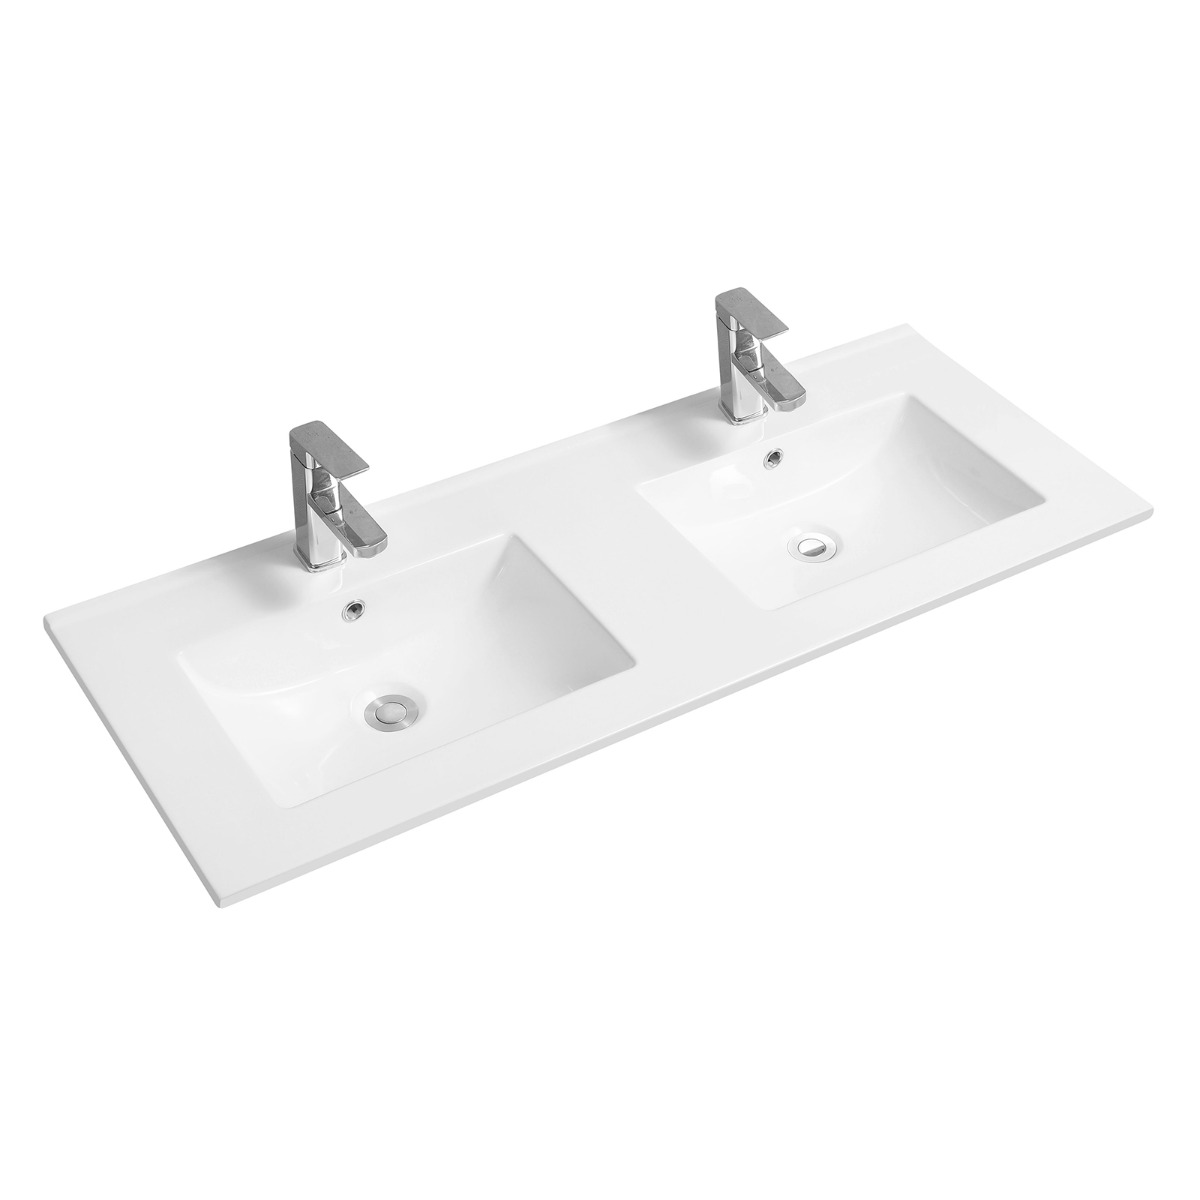 4001A Ceramic 121cm Thin-Edge Double Inset Basin with Scooped Bowl